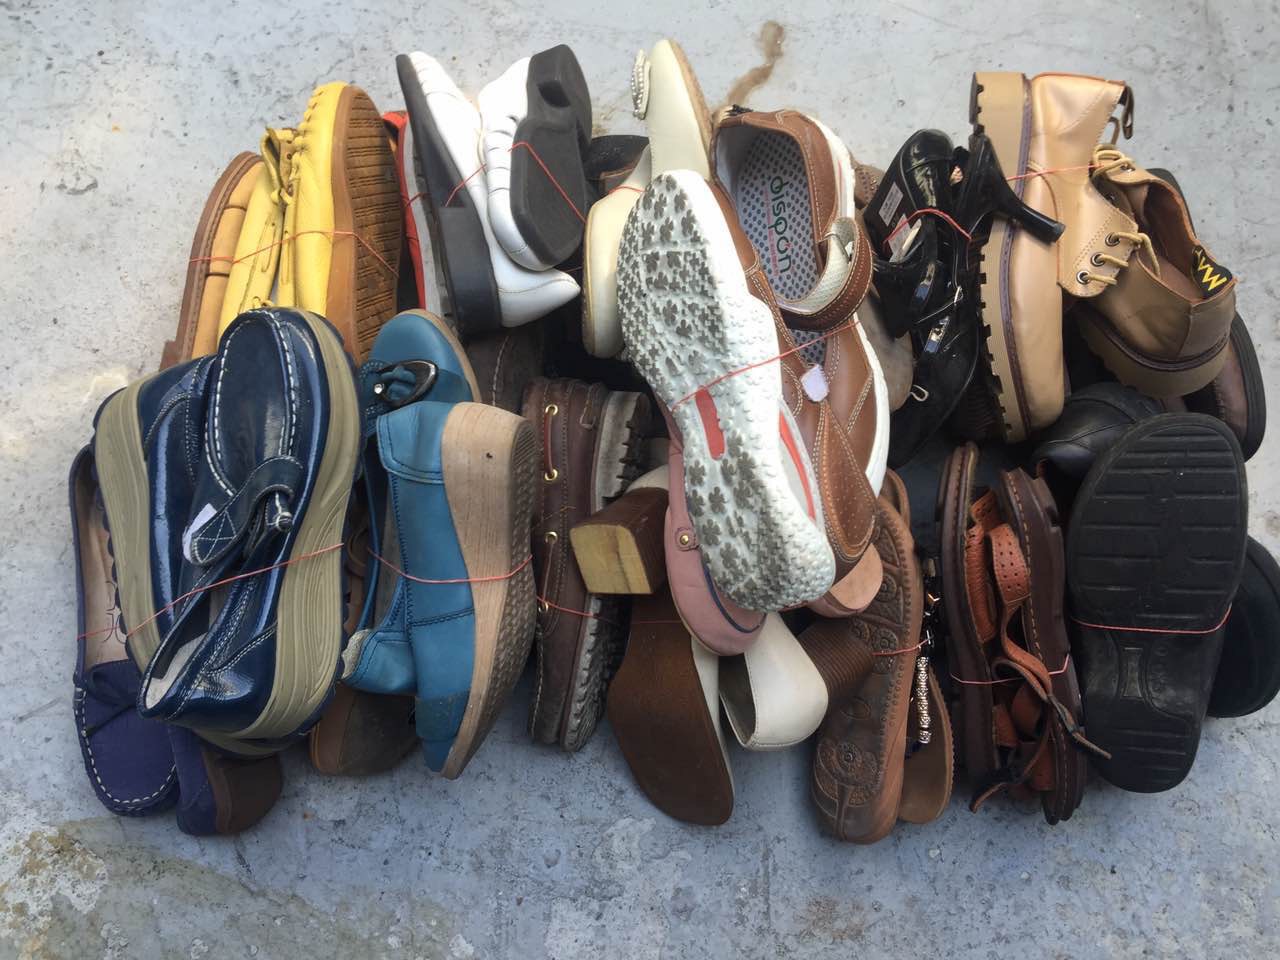 wholesale used shoes,second hand shoes 